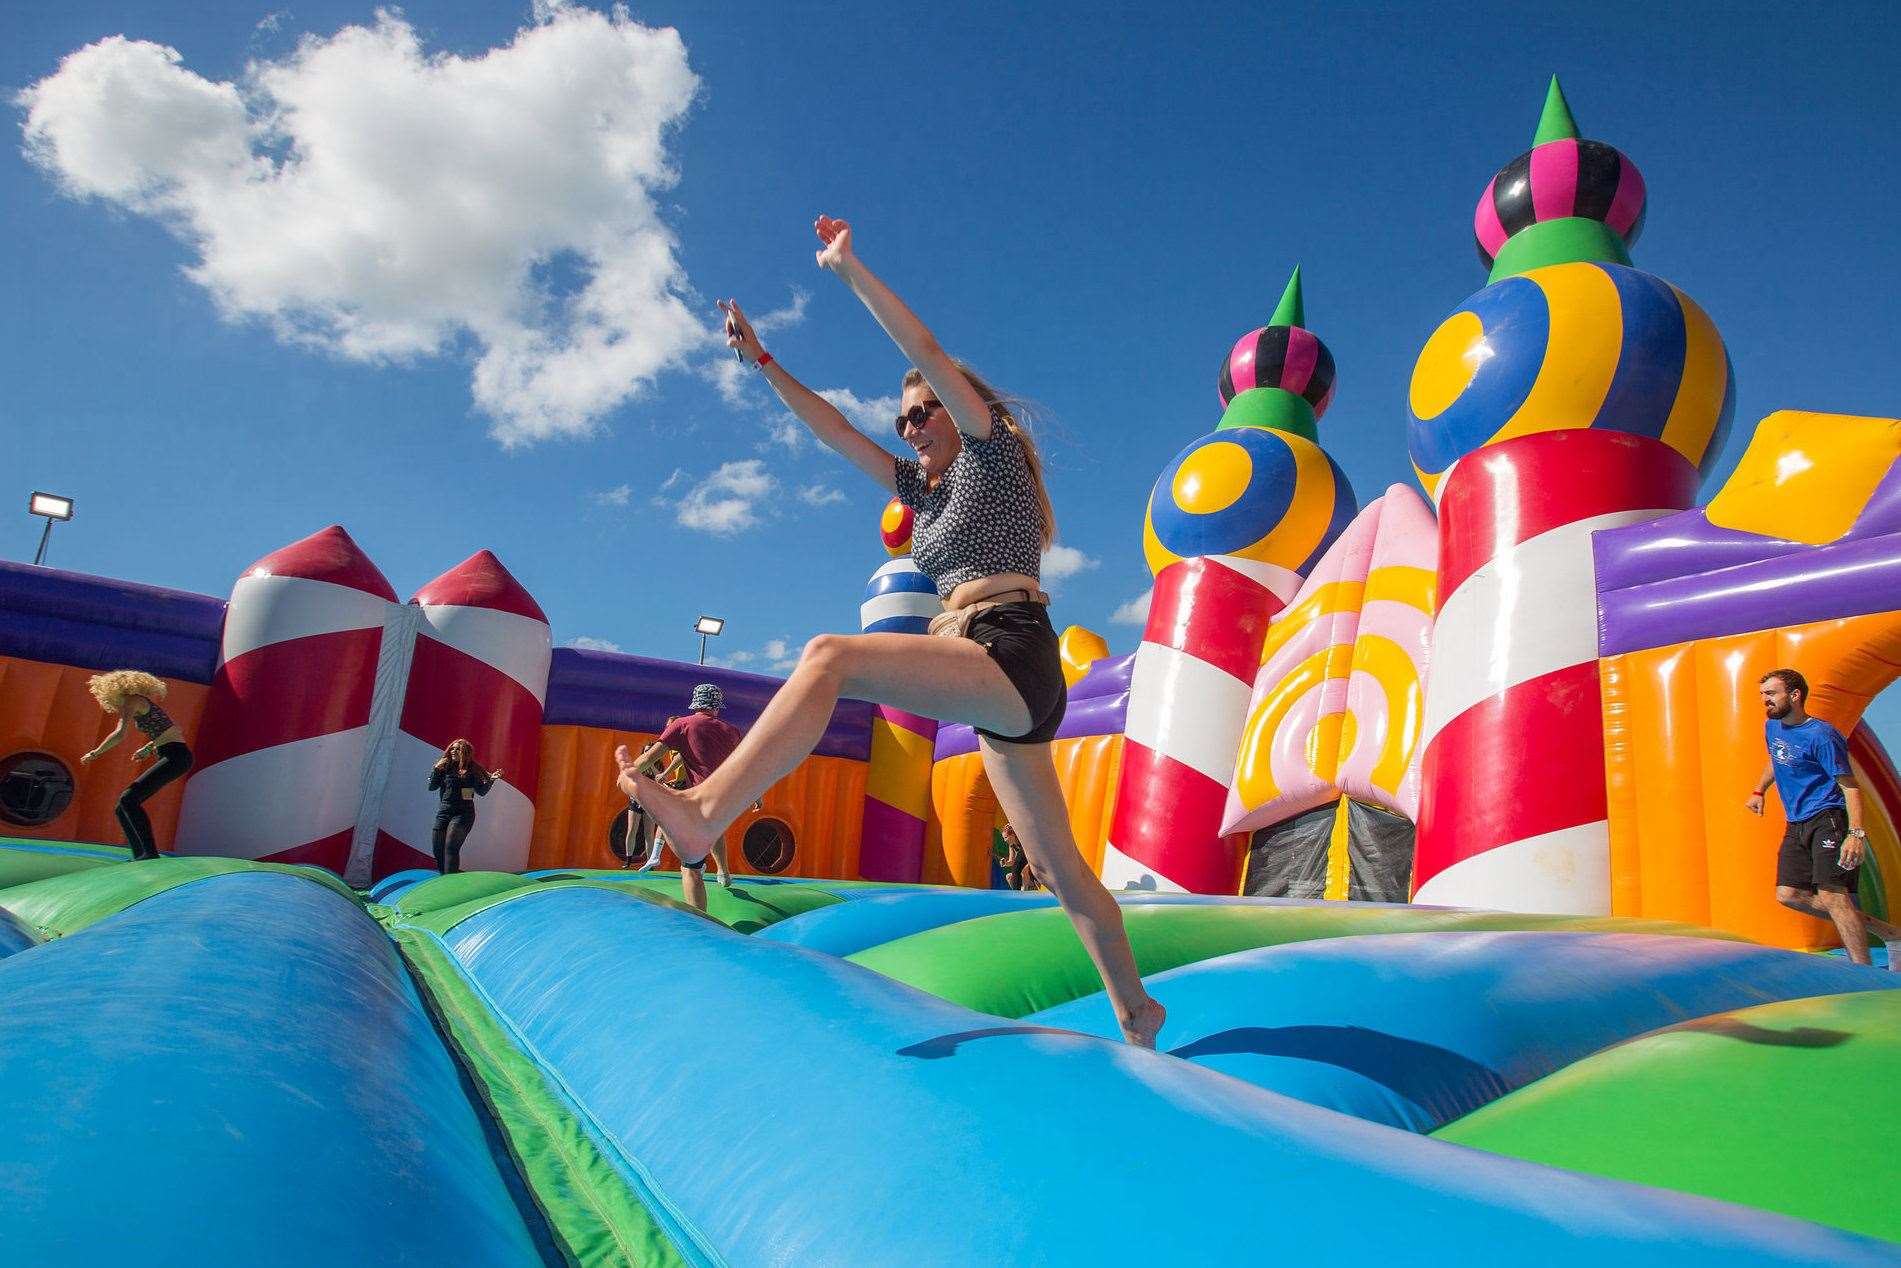 The world's biggest bouncy castle is back